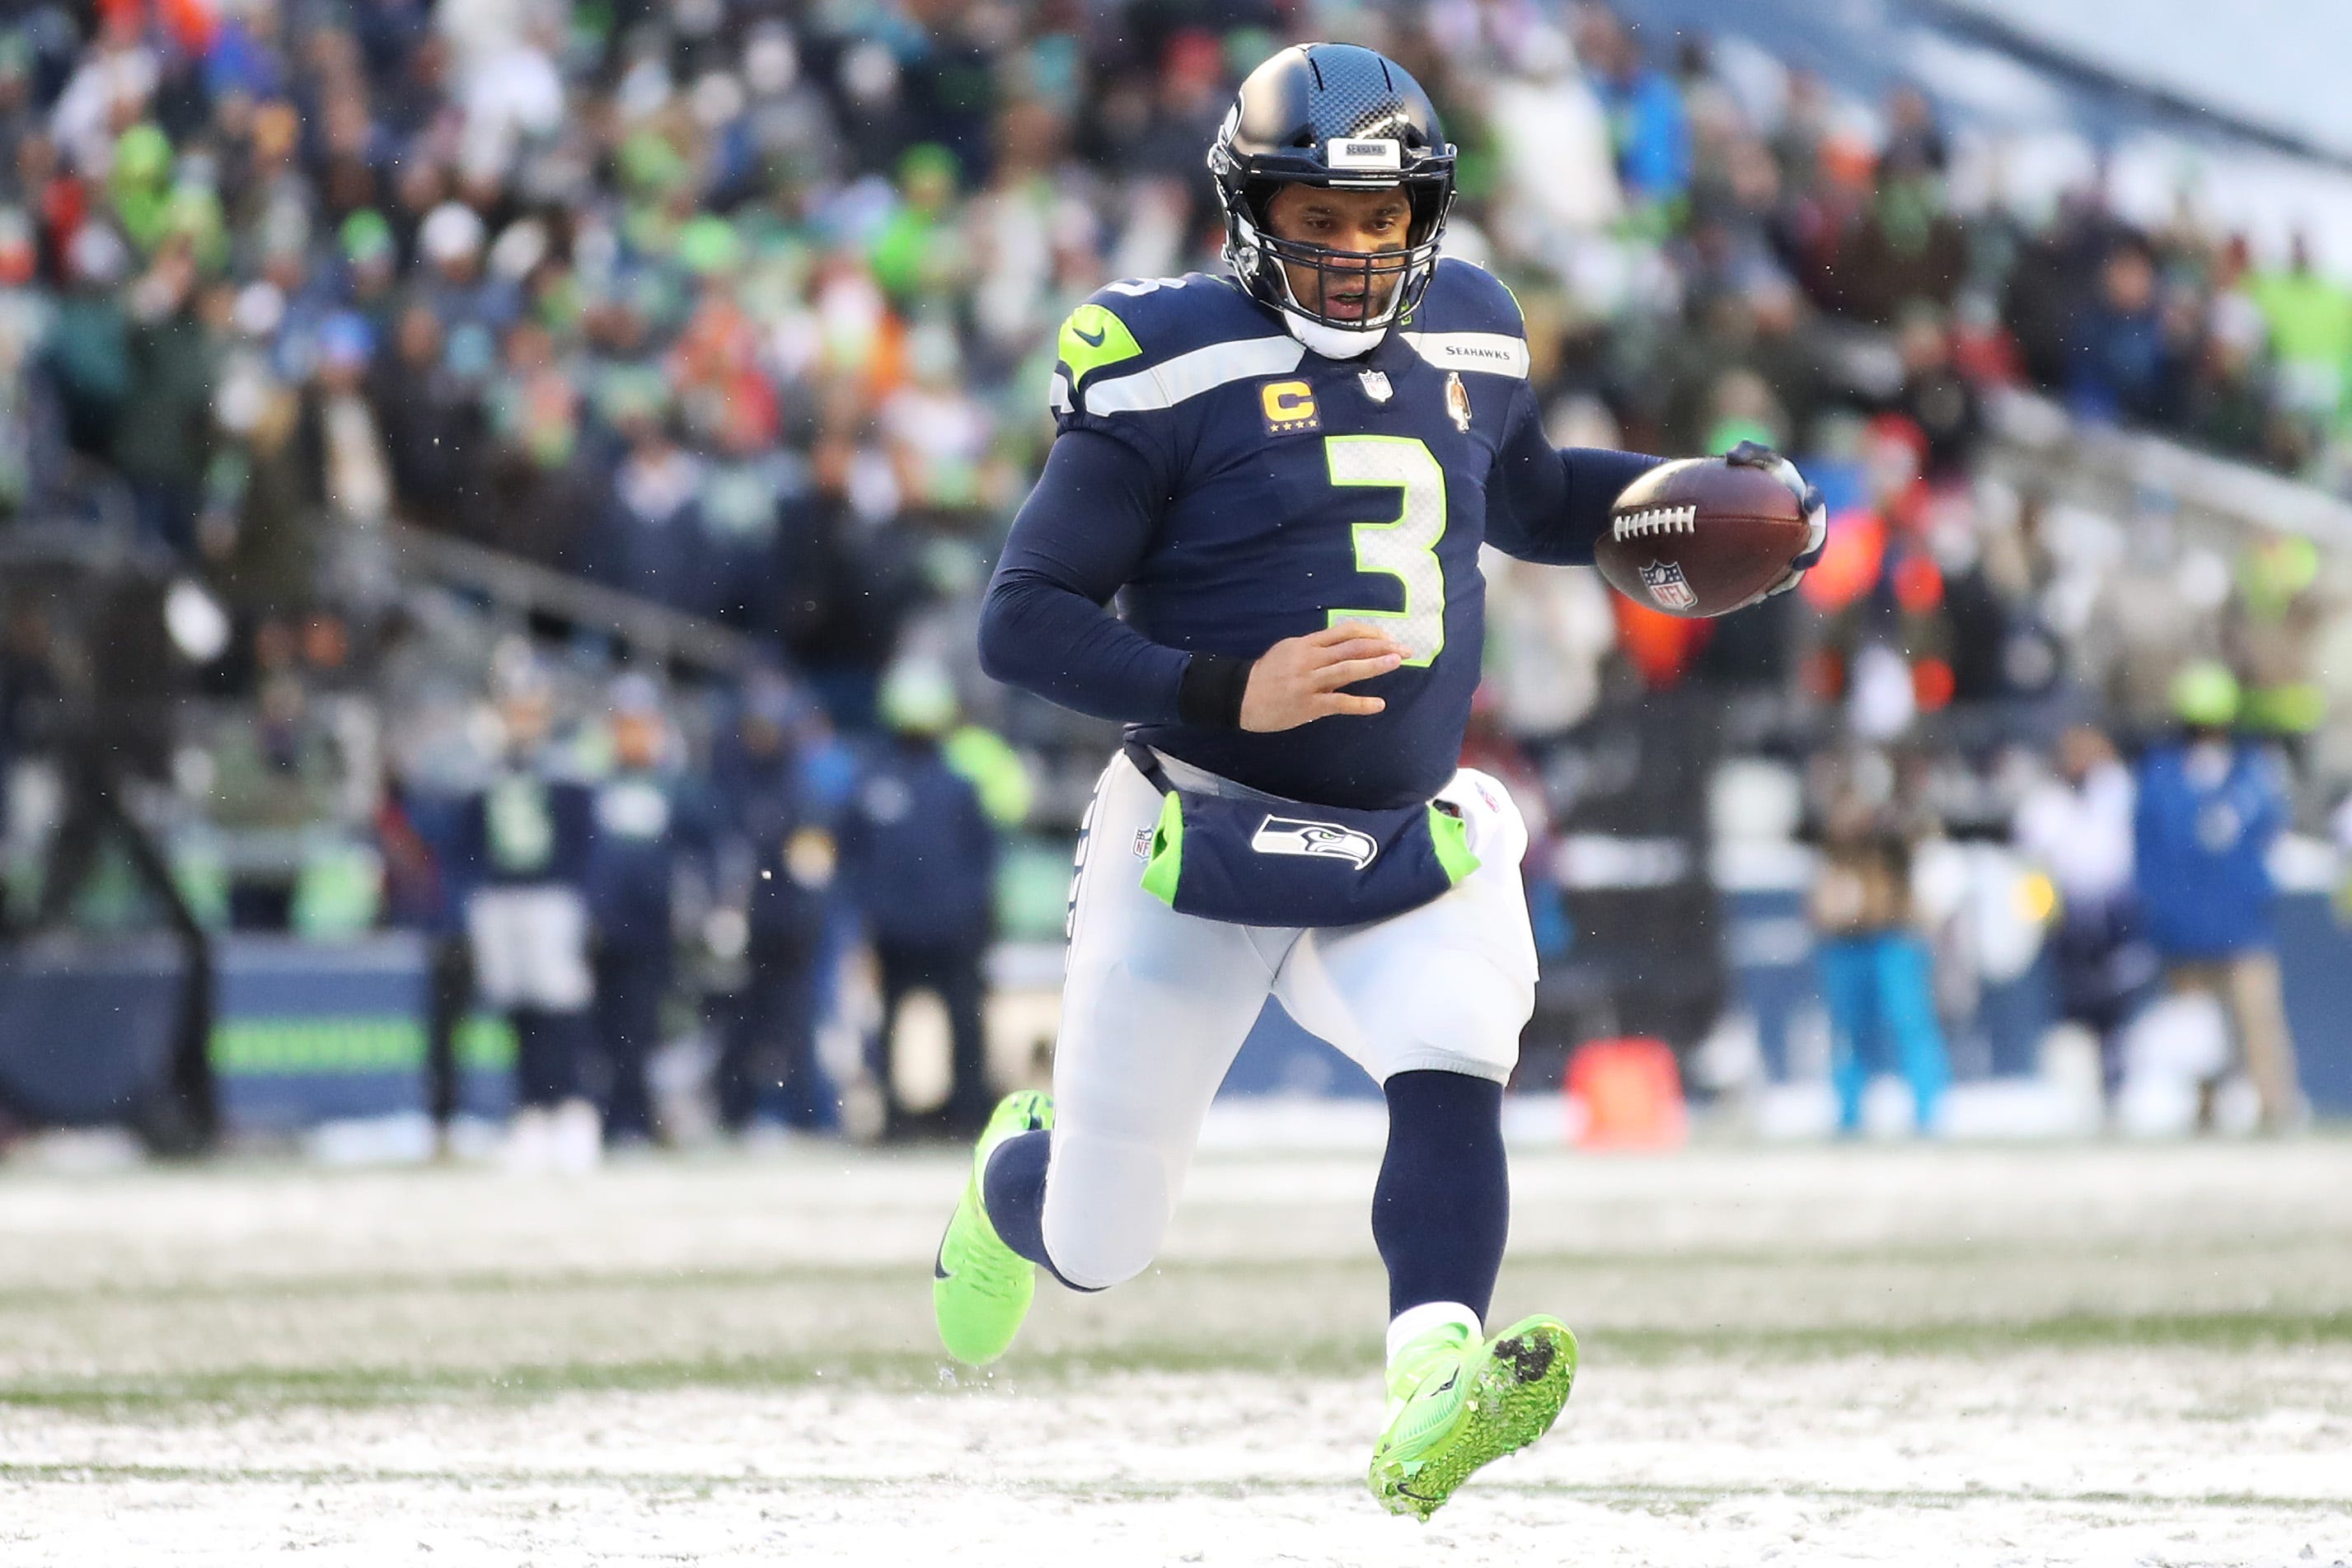 QB Russell Wilson: Traded to Broncos (previous team: Seahawks)